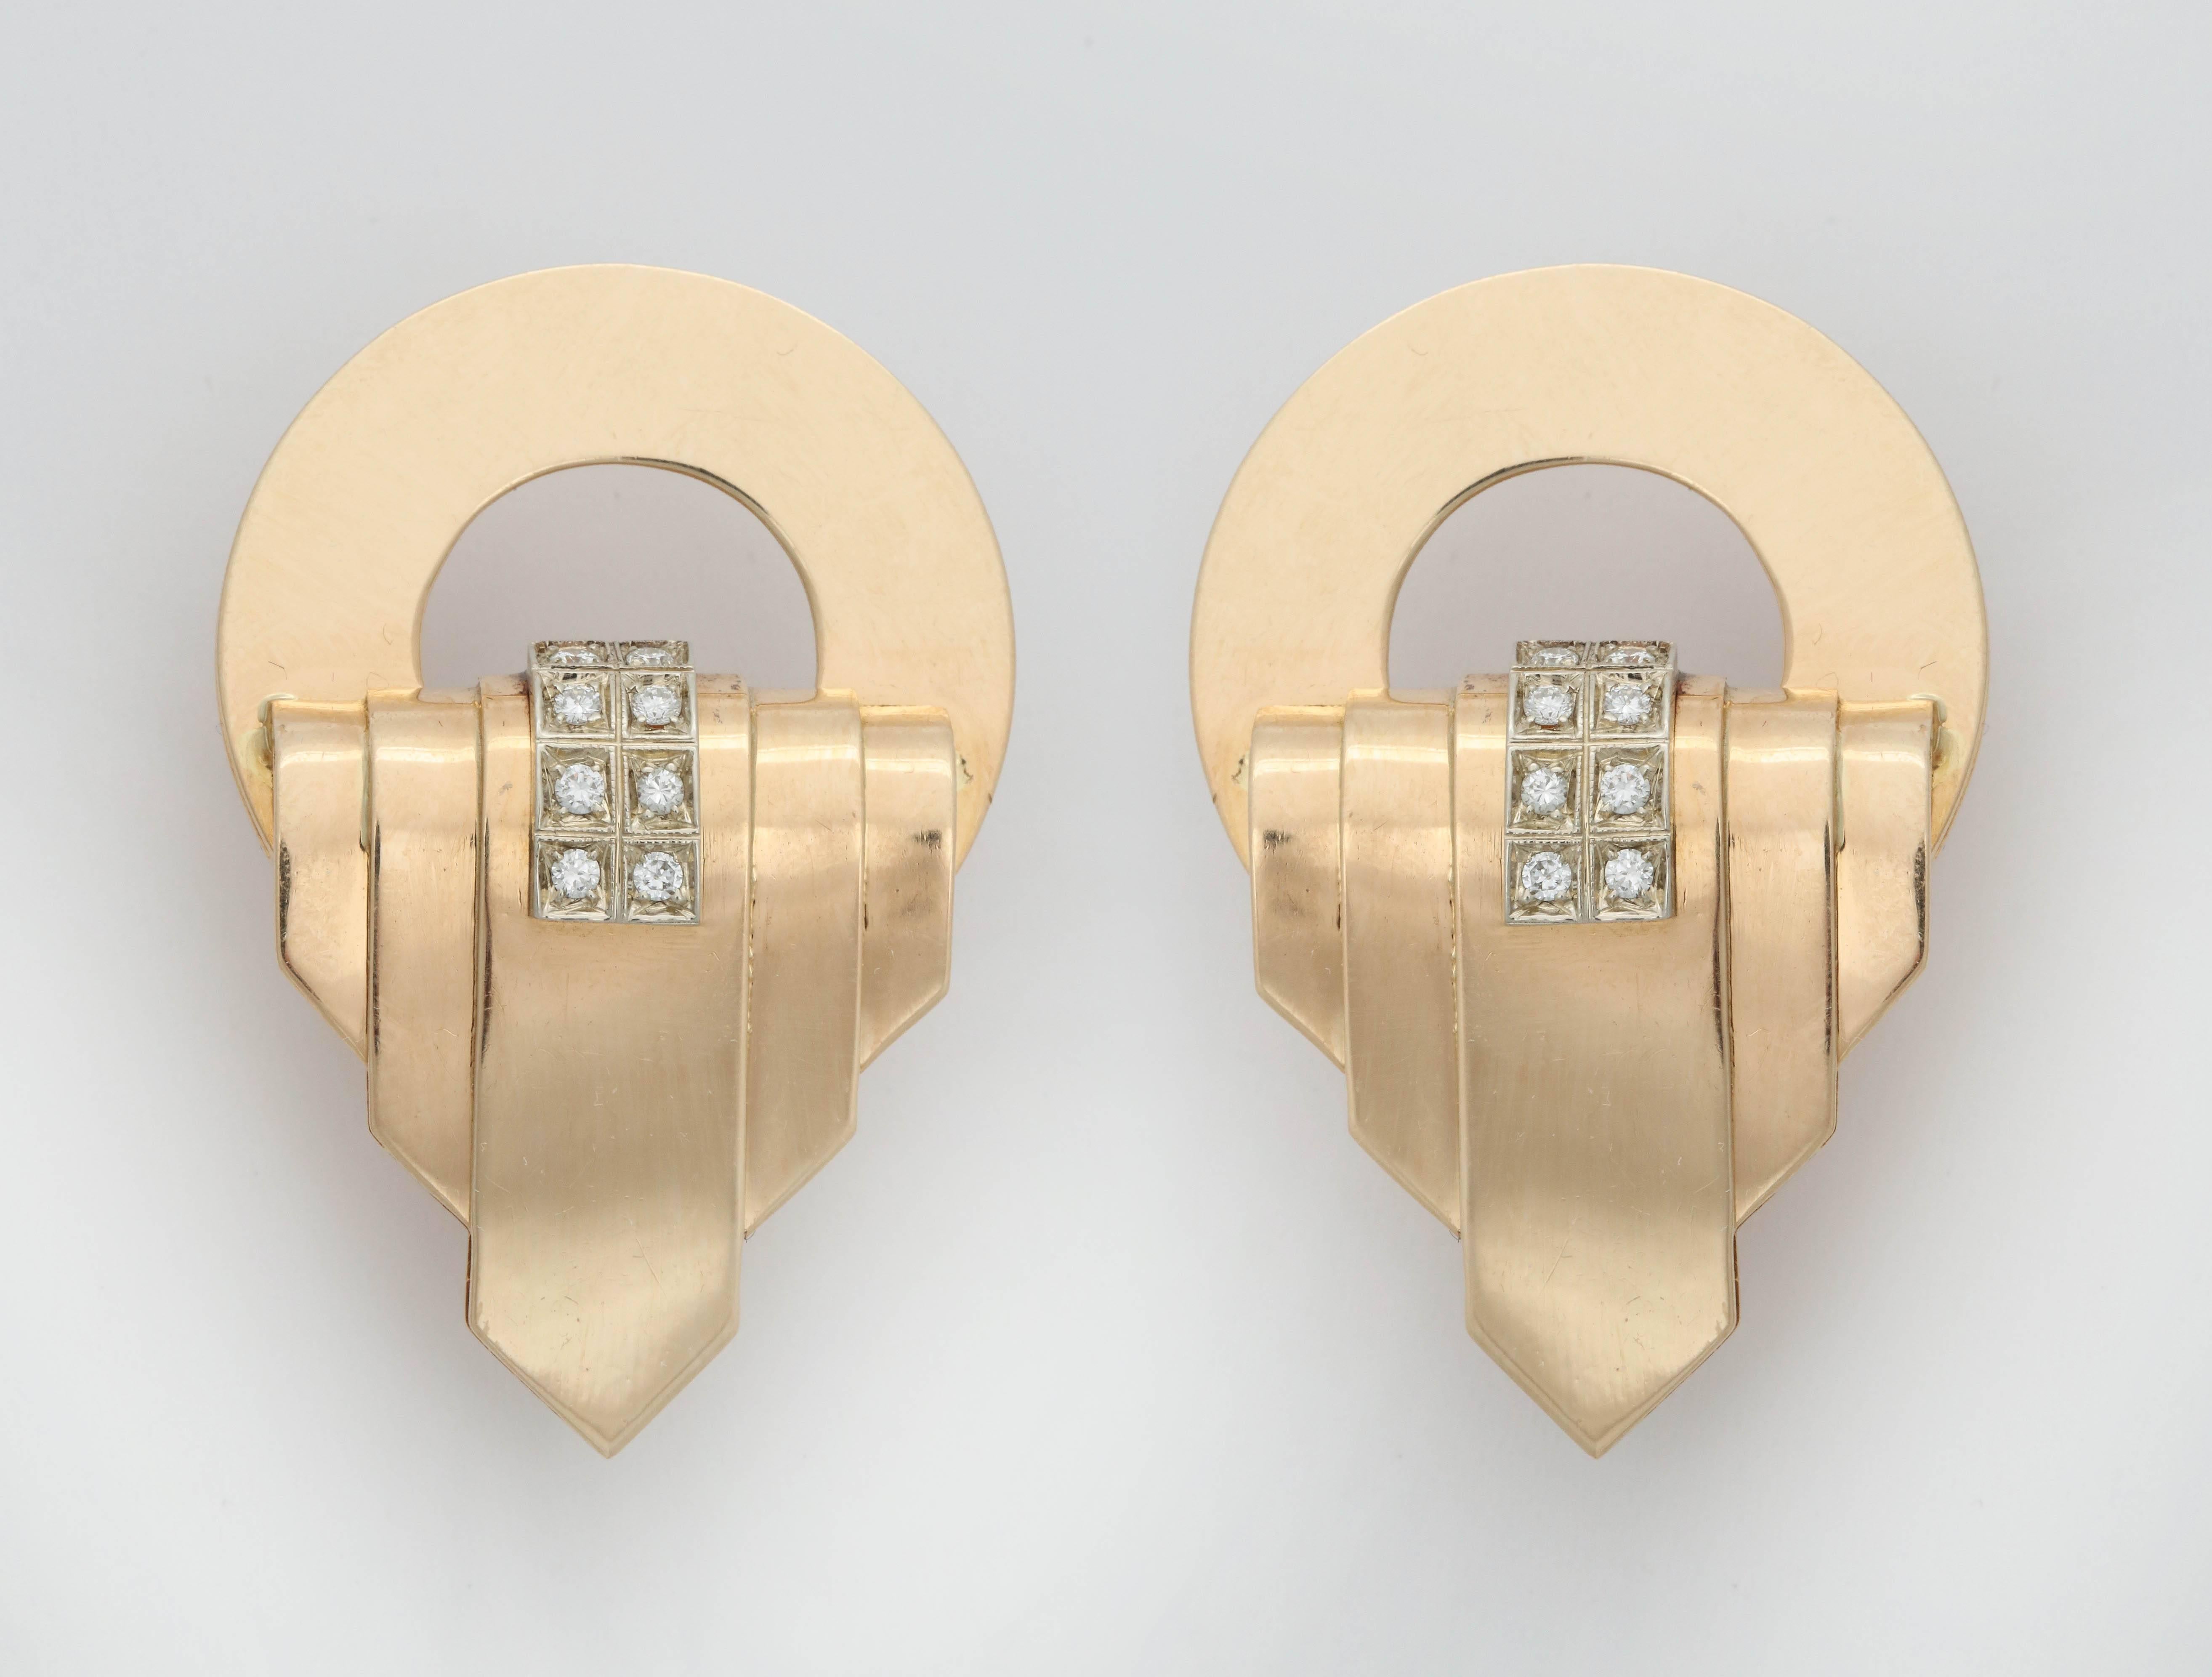 One Pair Of Ladies 18kt Yellow Gold Large Architectural And Geometrical Design Earclips With A Circular Design On Top And Chrysler Type Art Deco Design On Bottom Of Earrings.Earrings Further Created with Sixteen Full Cut Diamonds Weighing